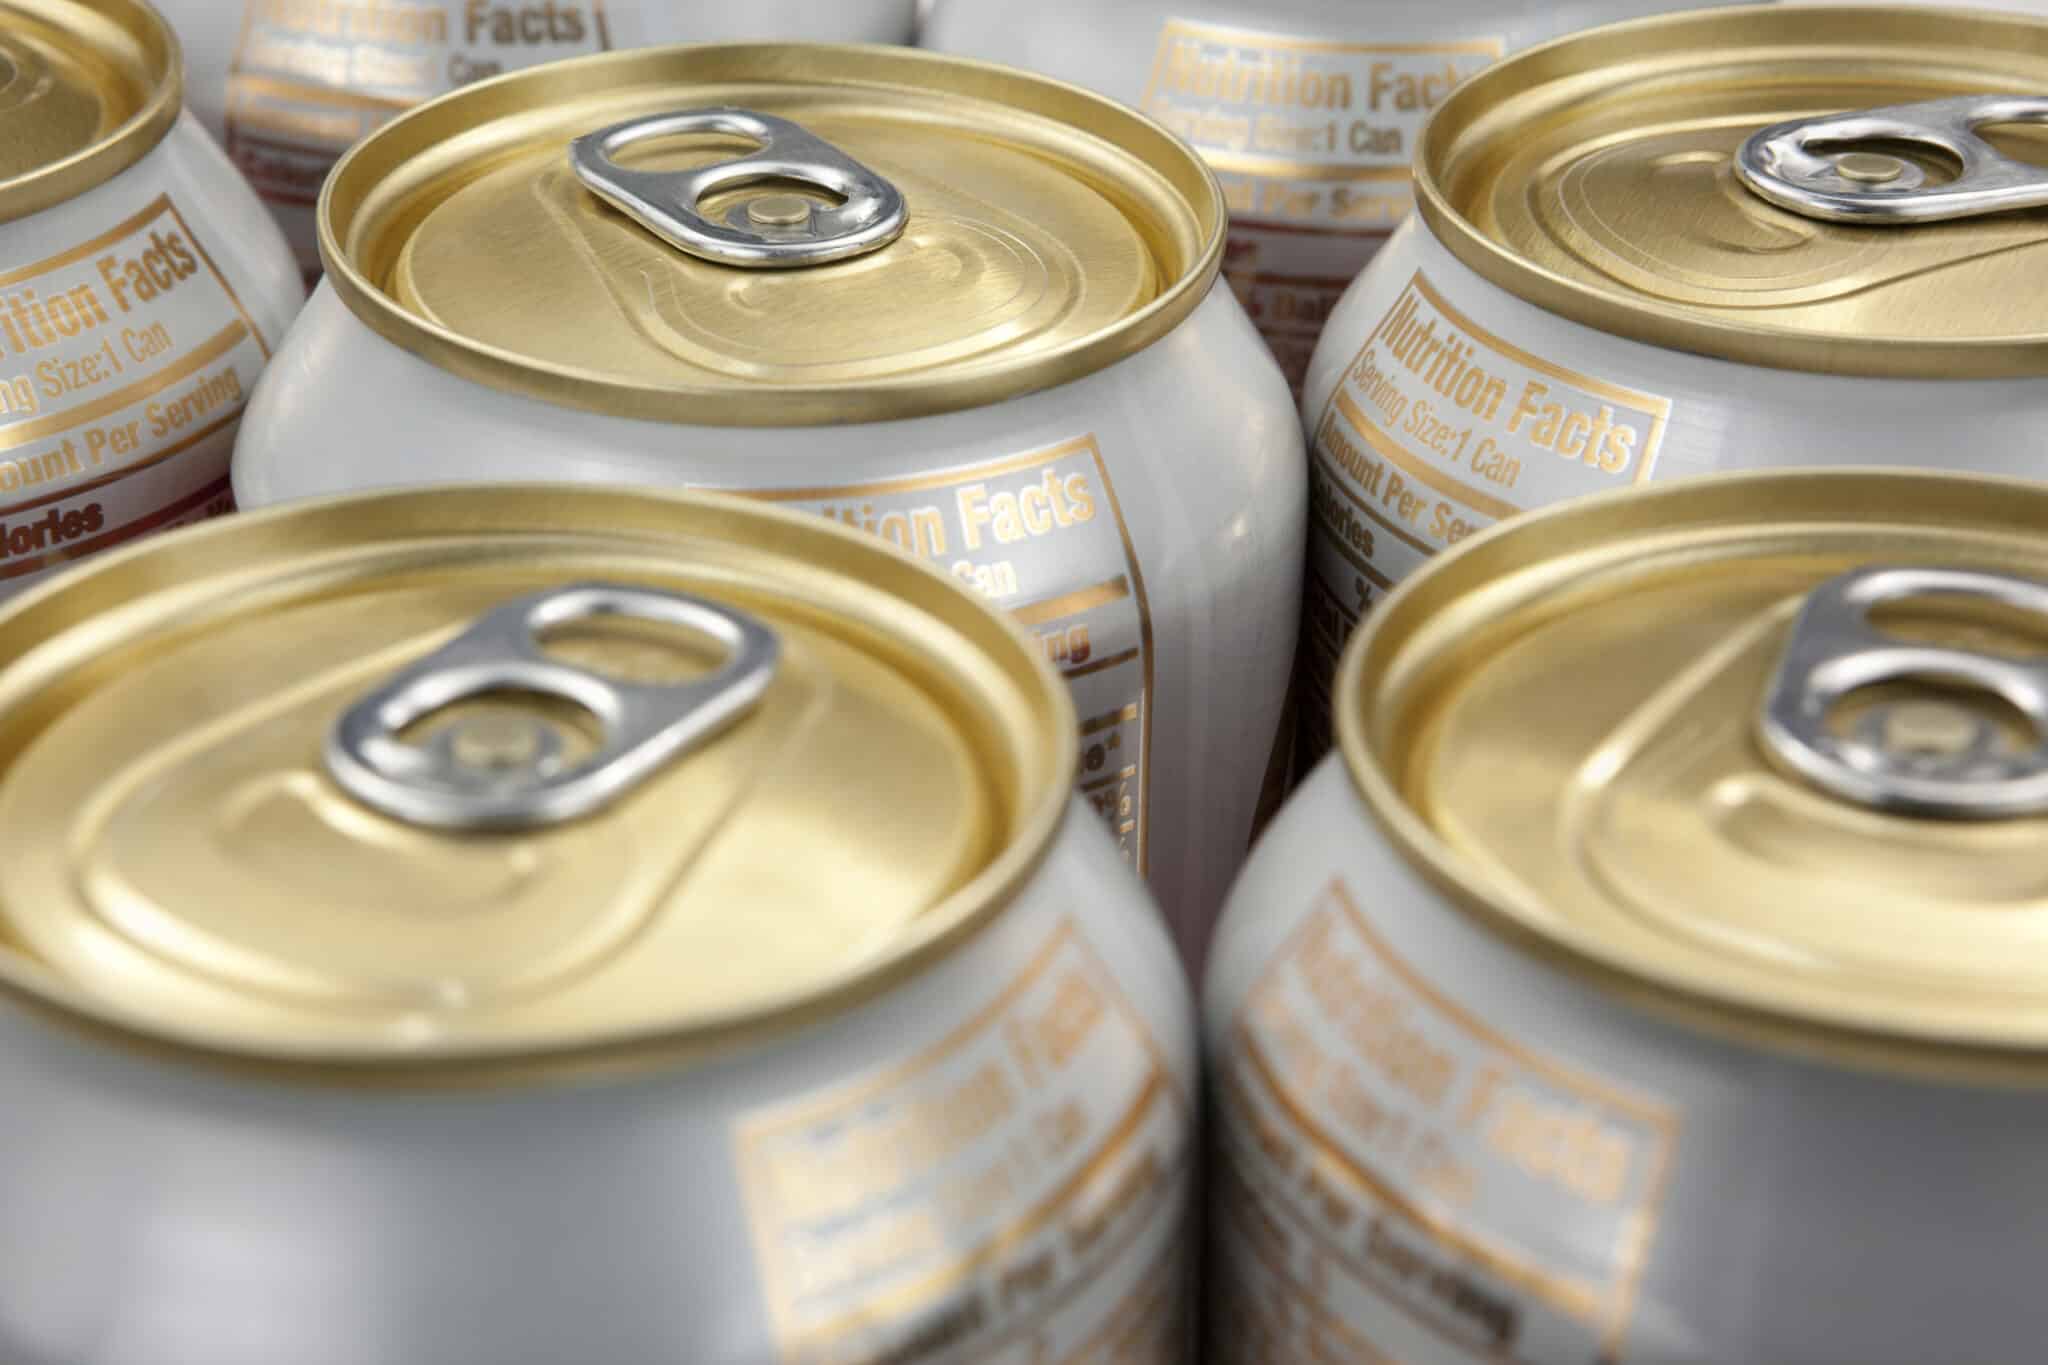 Top down image of beer cans